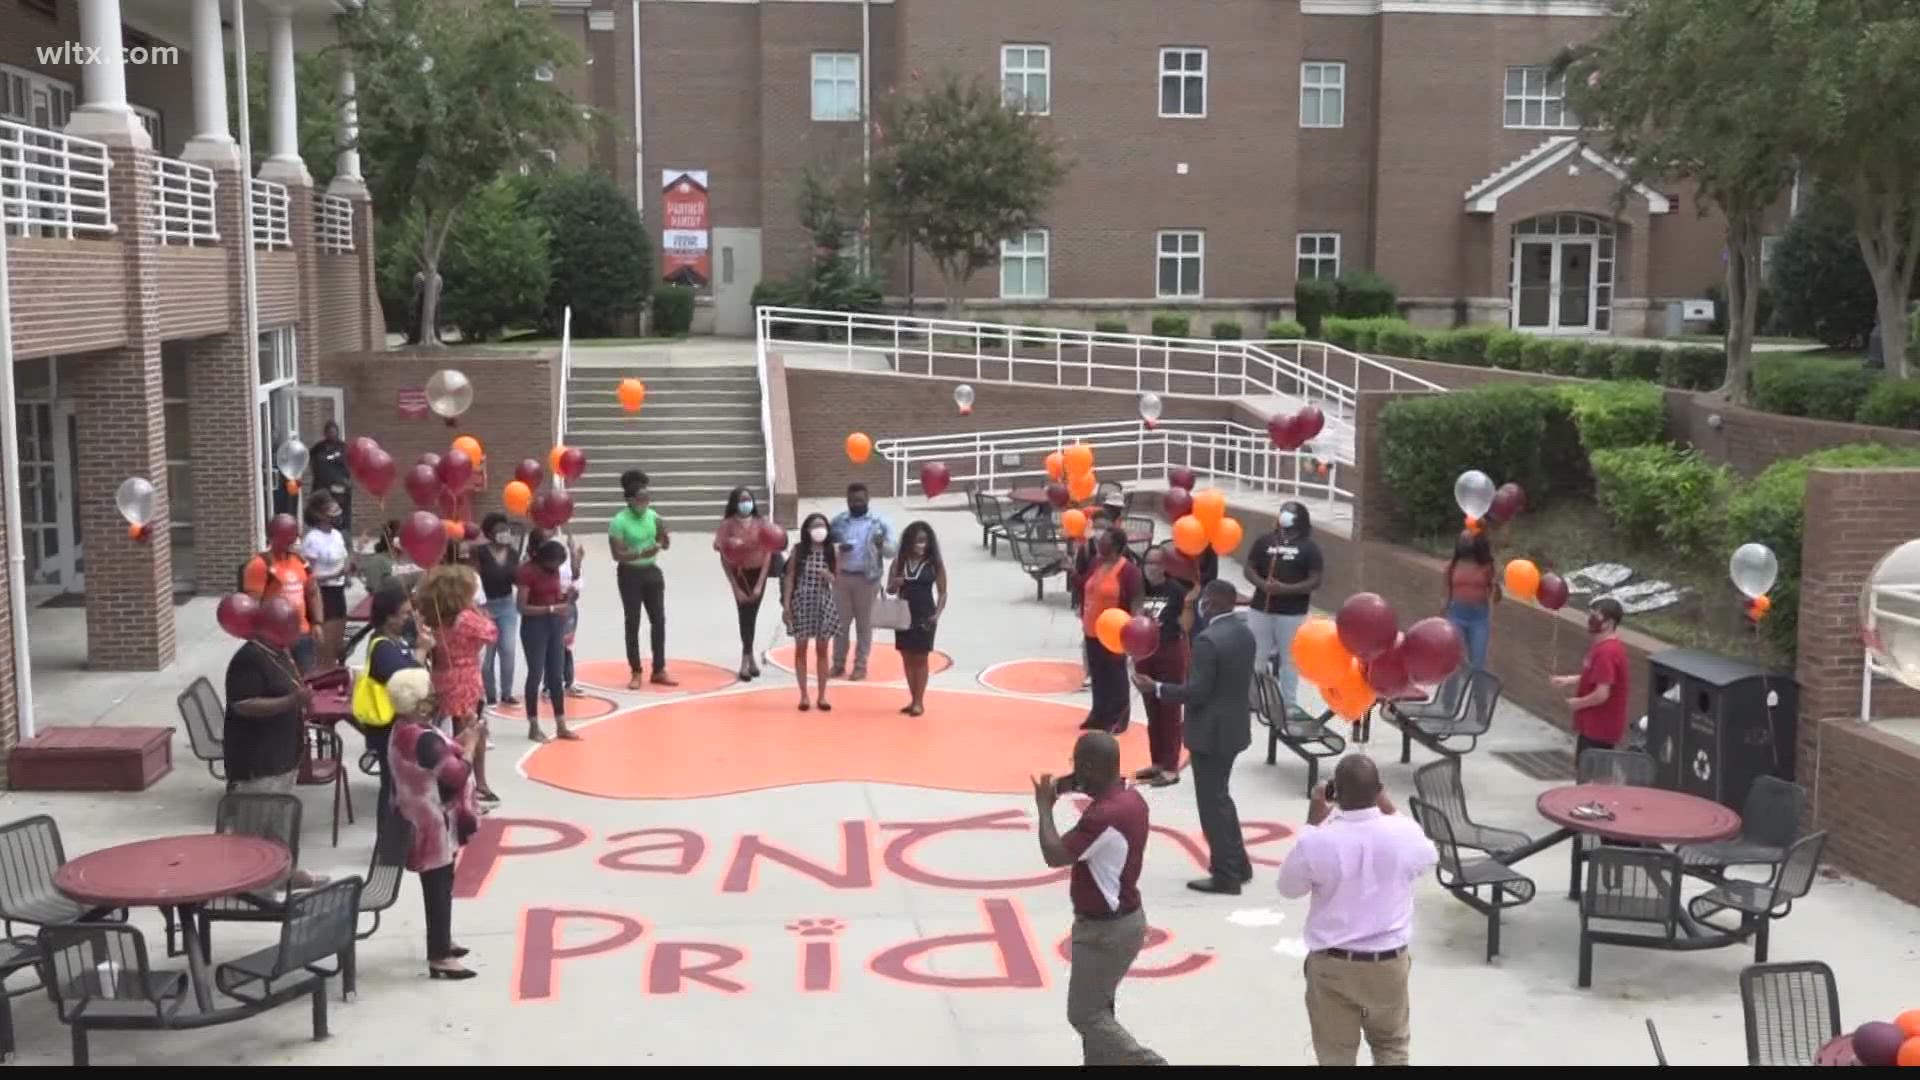 Claflin University is celebrating historical Black colleges and universities during HBCU week.